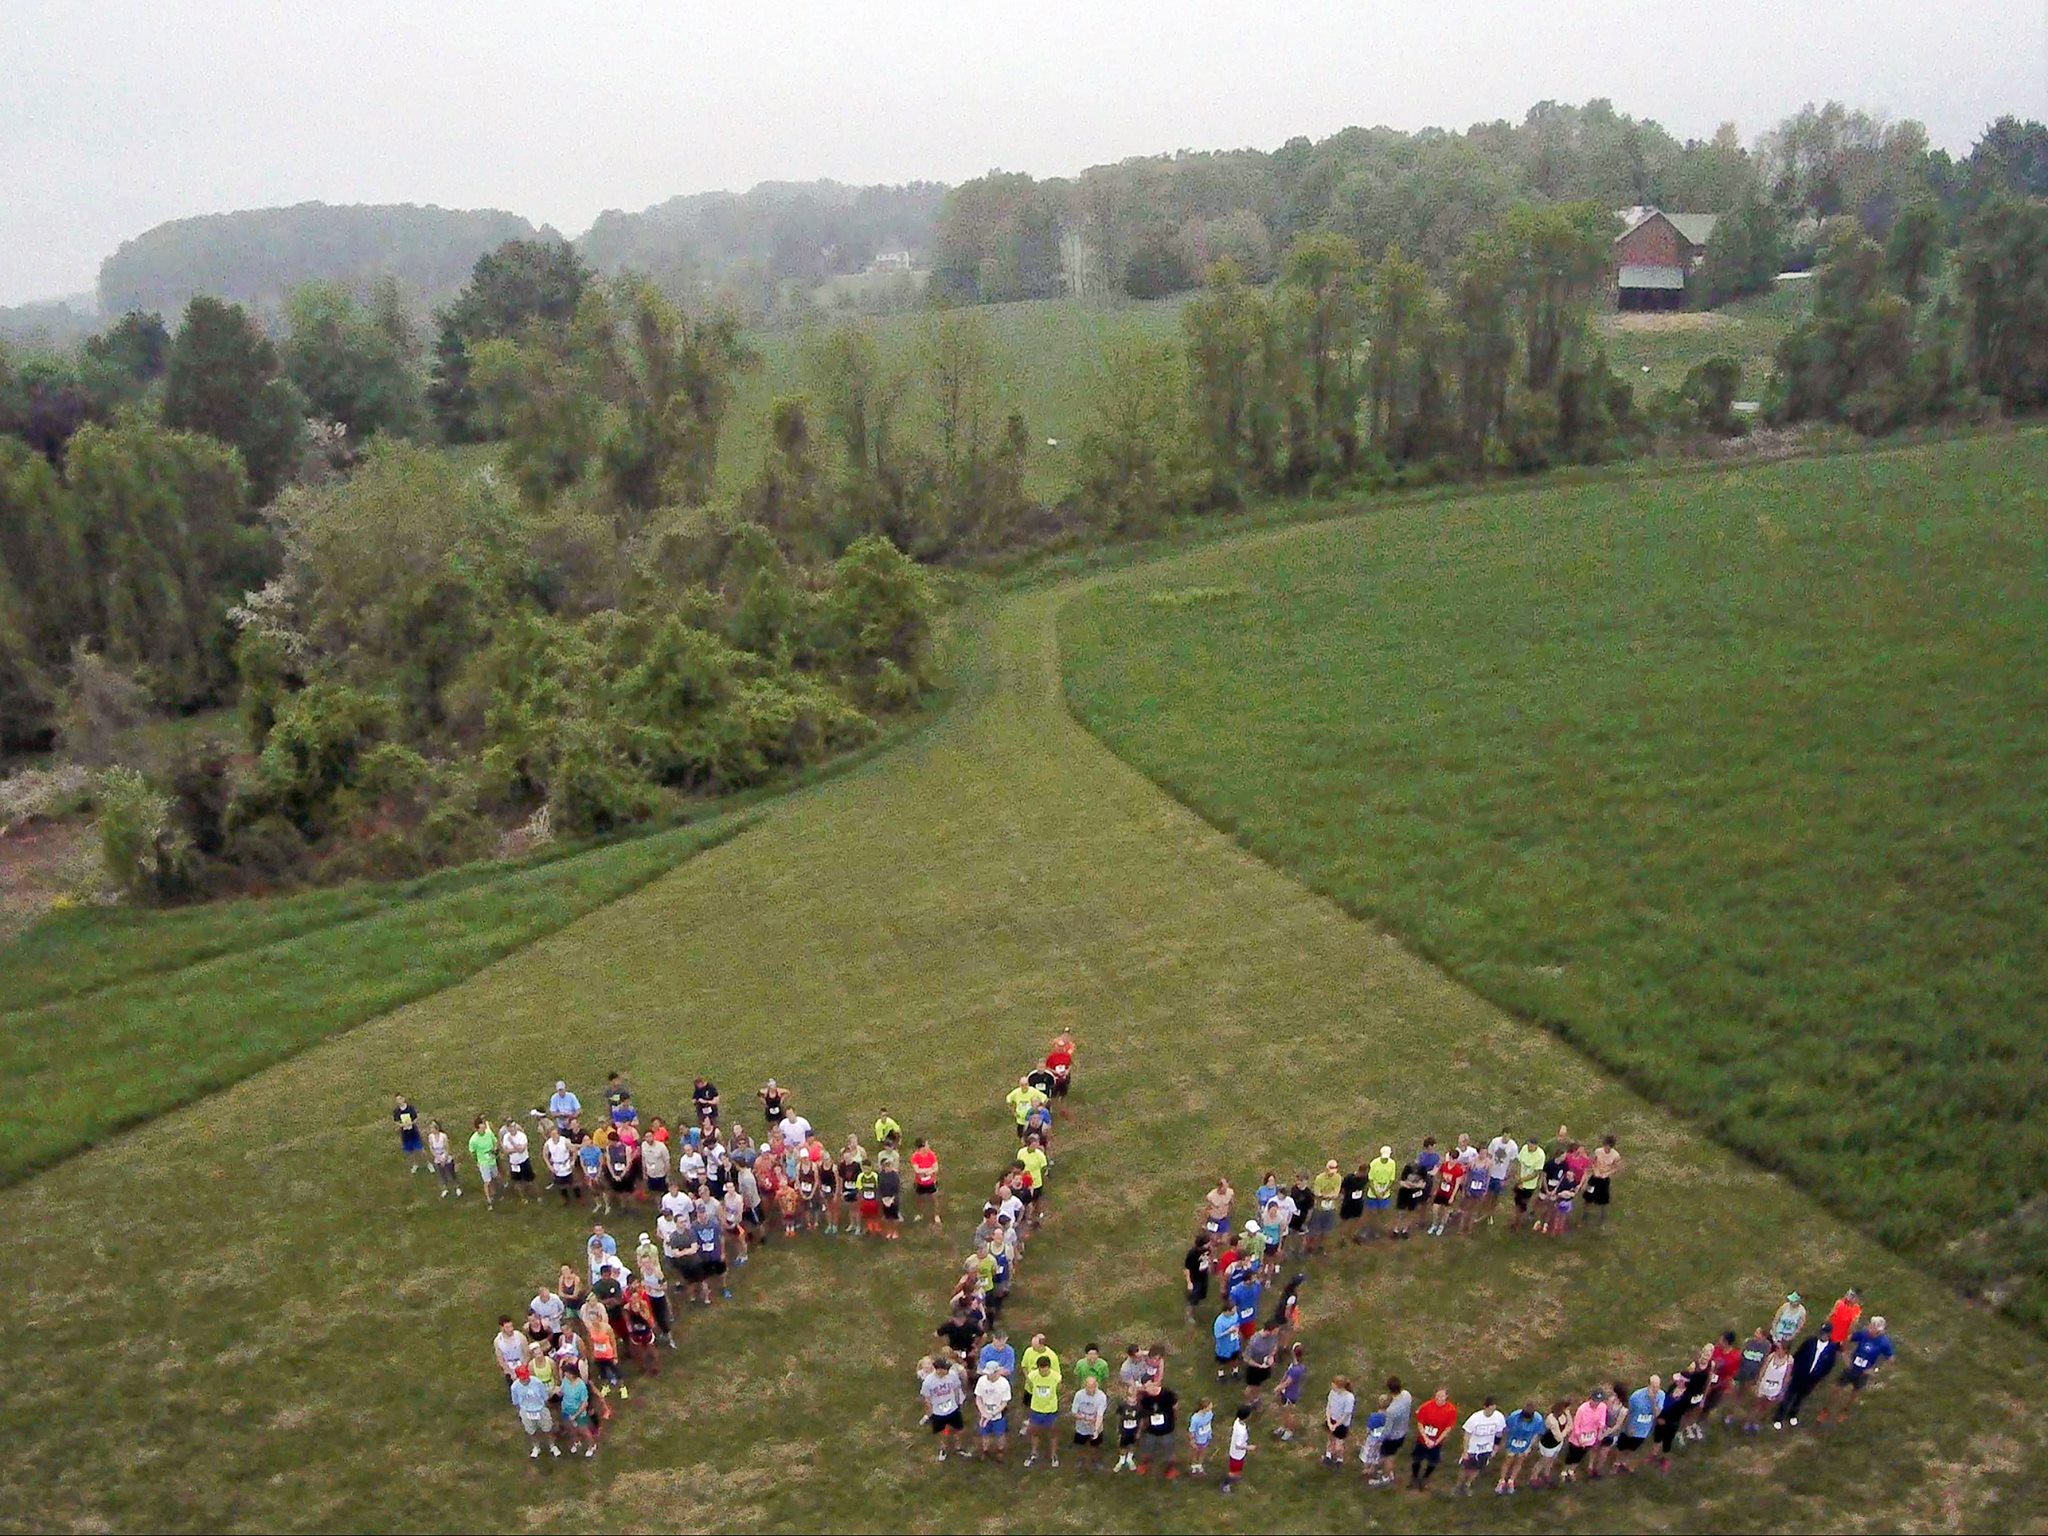 TLC Spelled Out with Humans in a Field